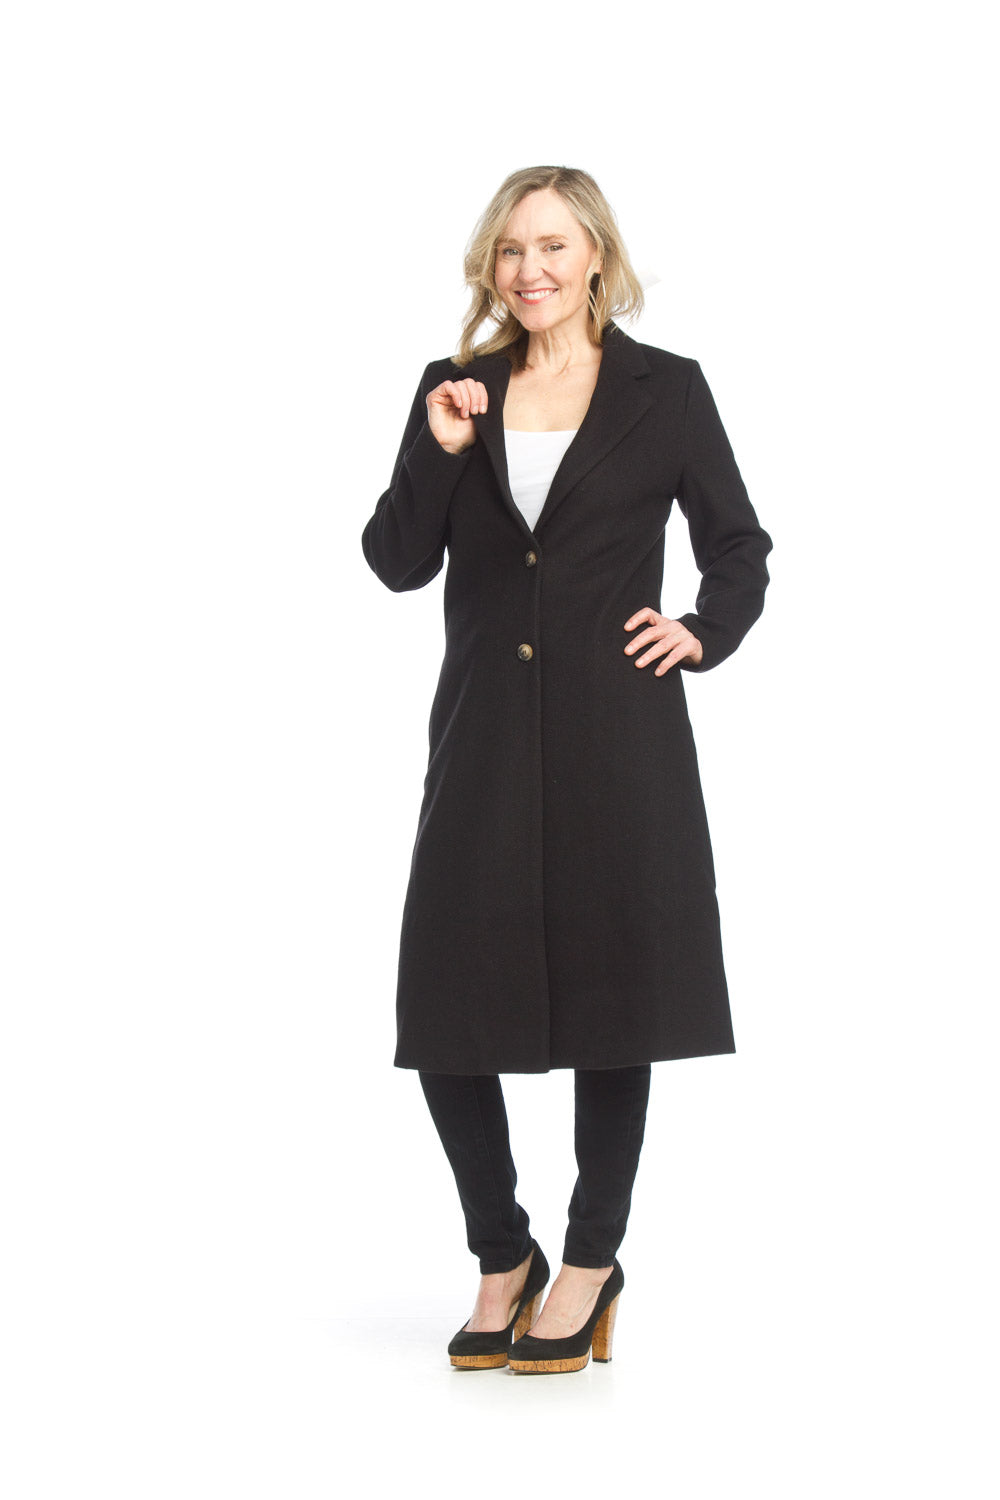 JT-13751 - Black - Lapel Single Breasted Coat with Pockets